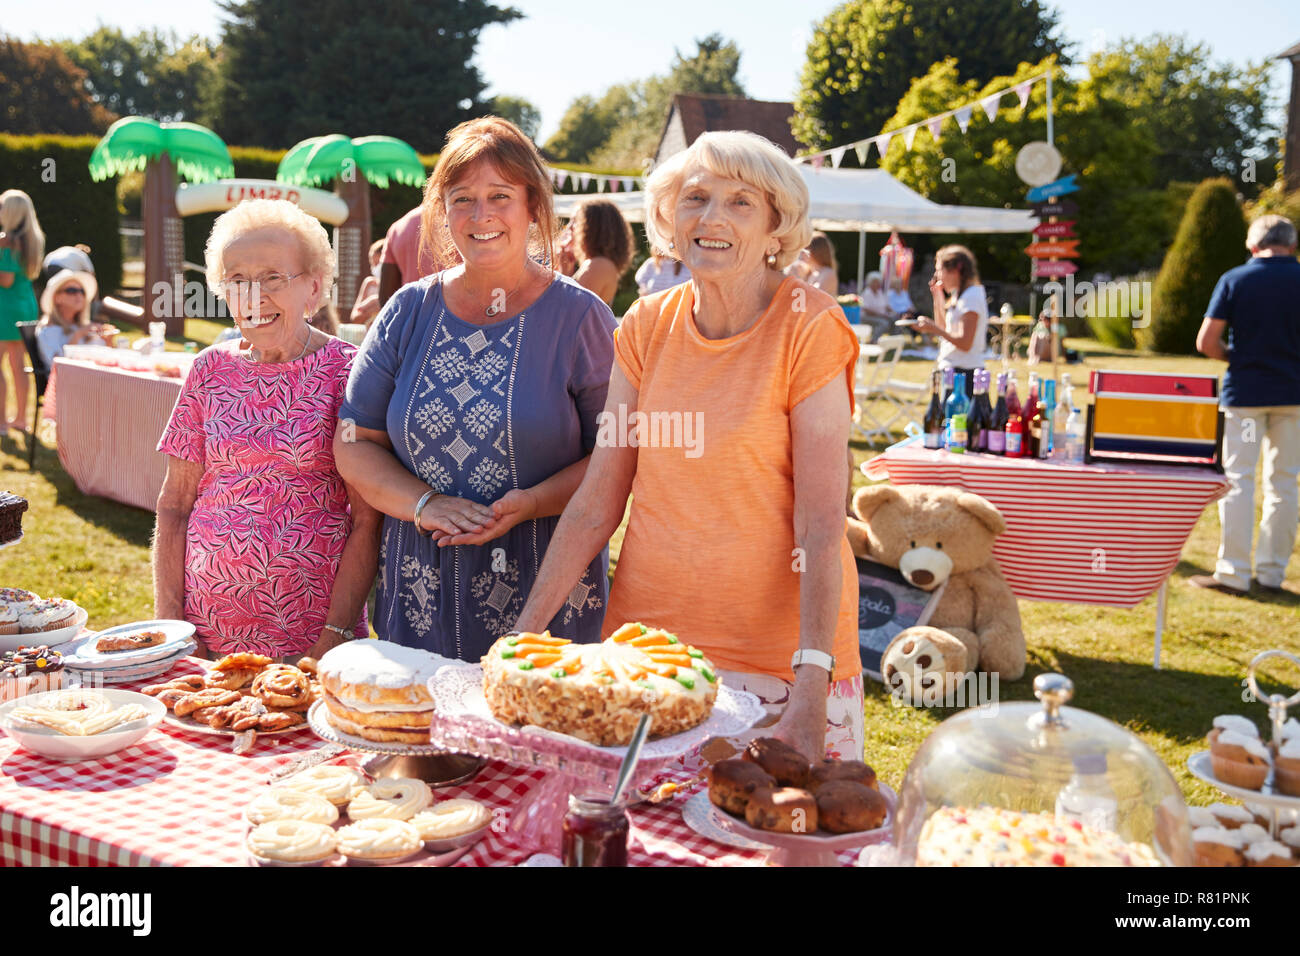 Portrait Of Women Serving On Cake Stall At Busy Summer Garden Fete Stock Photo